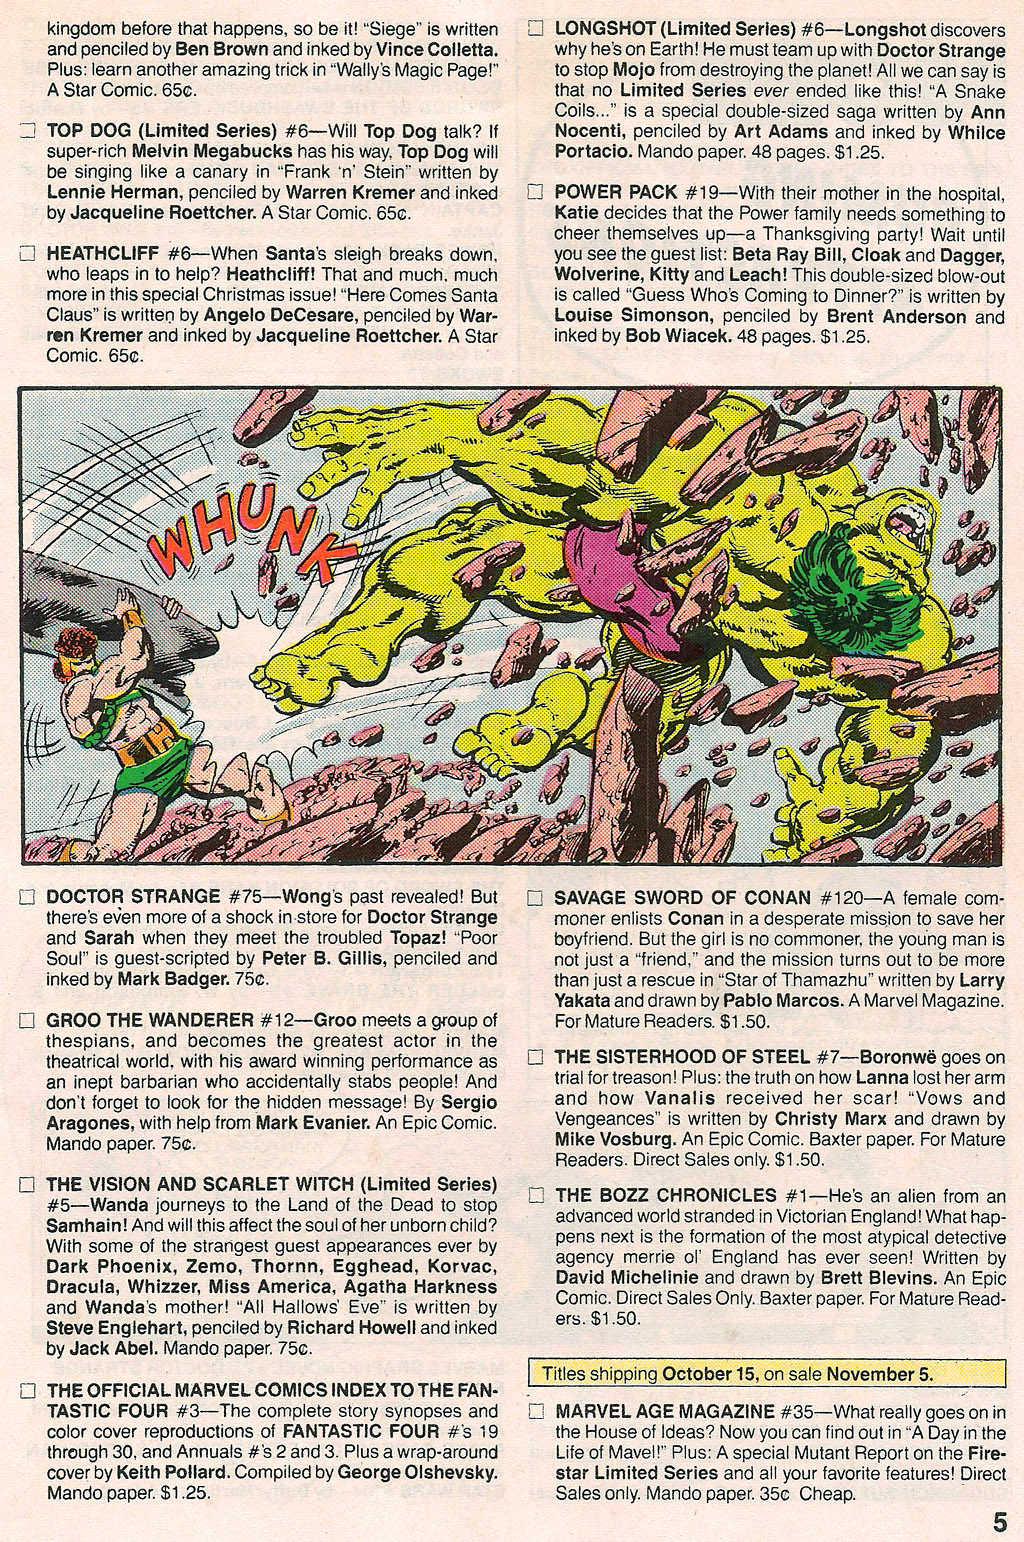 Read online Marvel Age comic -  Issue #34 - 7